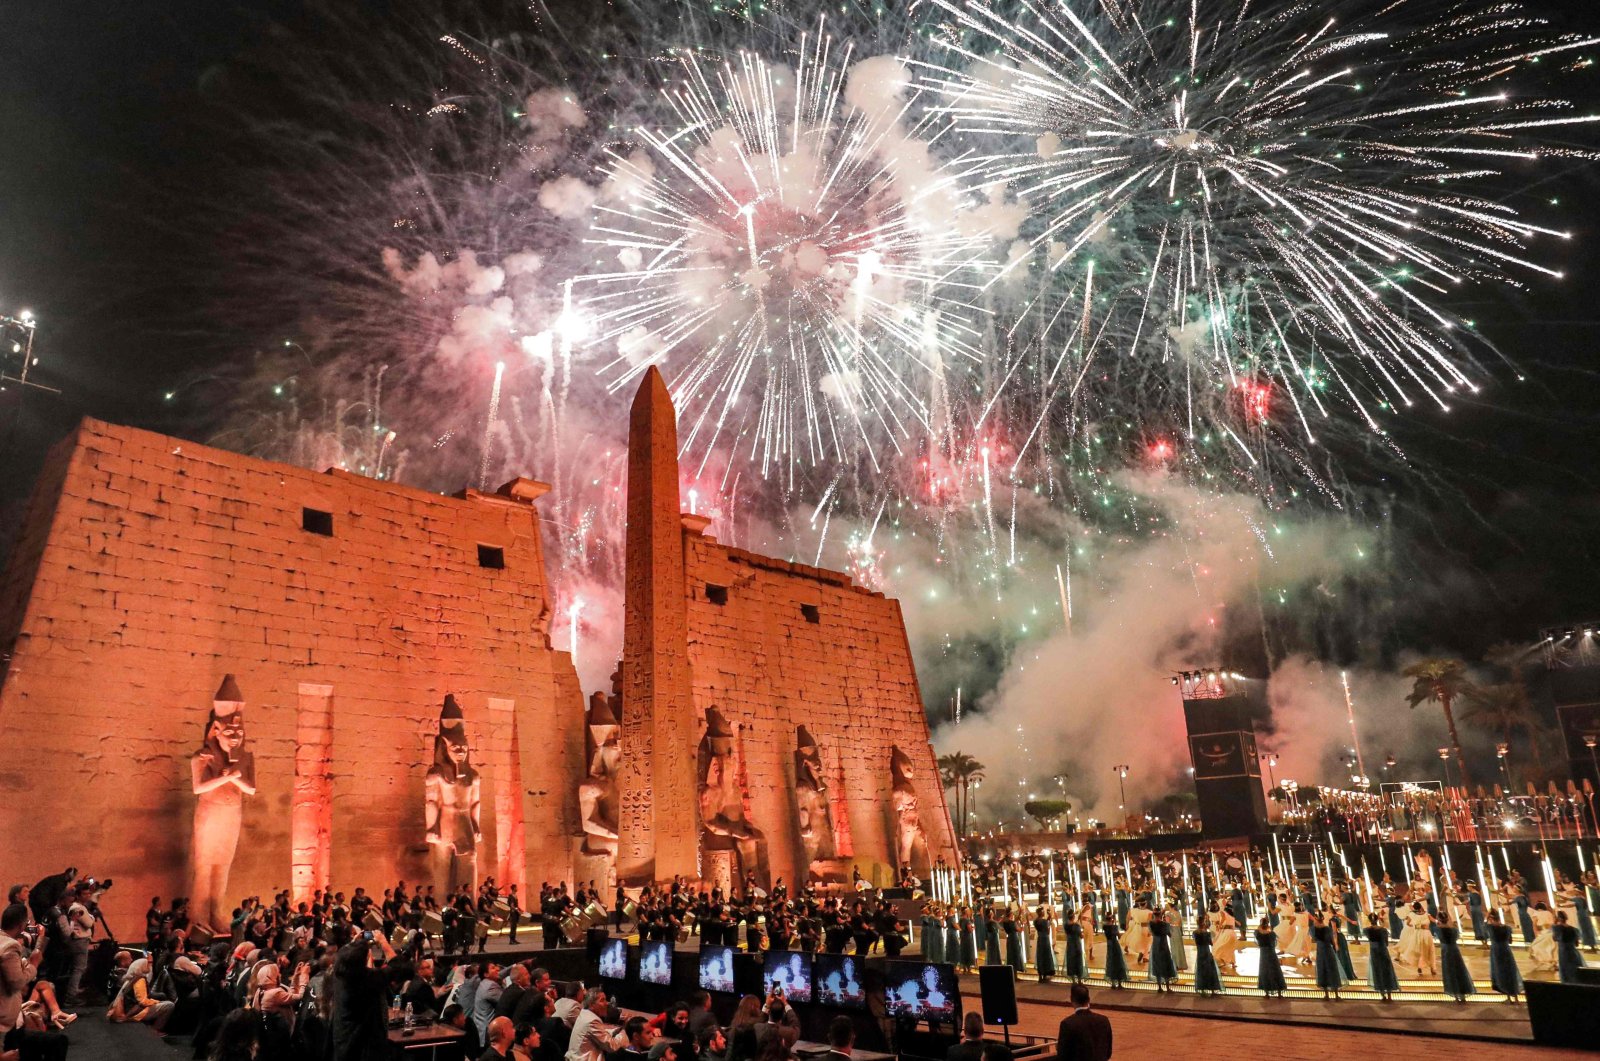 Fireworks light the sky during the official ceremony opening the 'Rams Road' outside the pylon and remaining obelisk at the entrance of the Temple of Luxor (built around 1400 B.C.) in Egypt's southern city of the same name on Nov. 25, 2021. (AFP Photo)